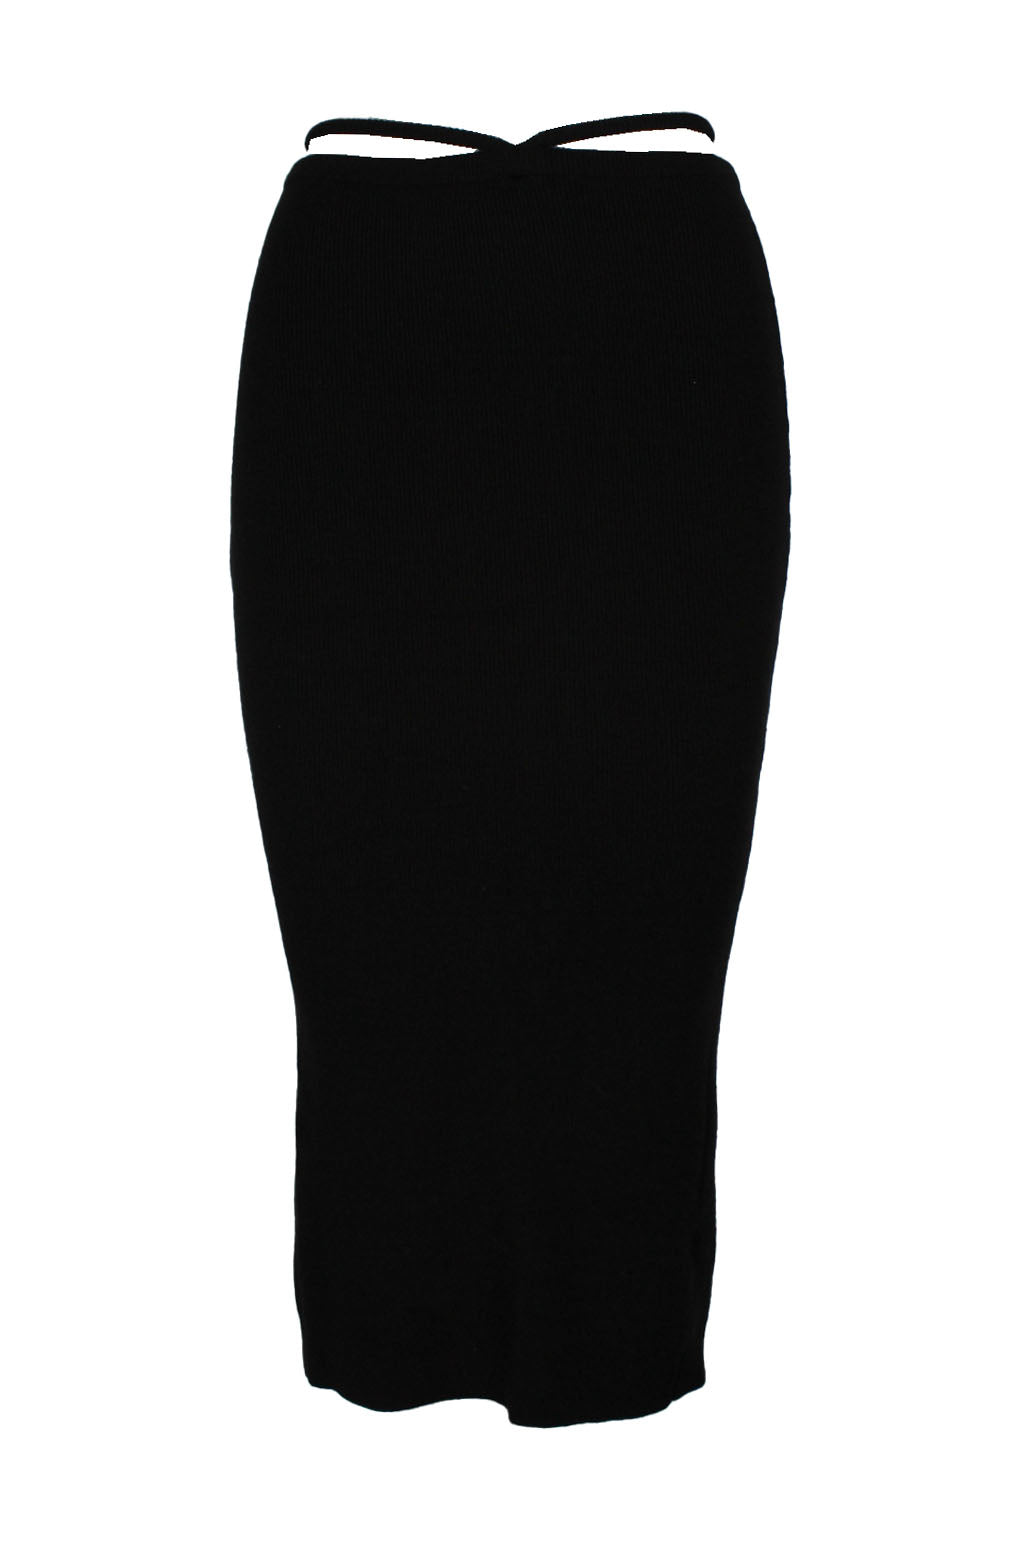 description: for love & lemons black knitted pencil skirt. features cross strap at waist, slit at back and fitted style. 